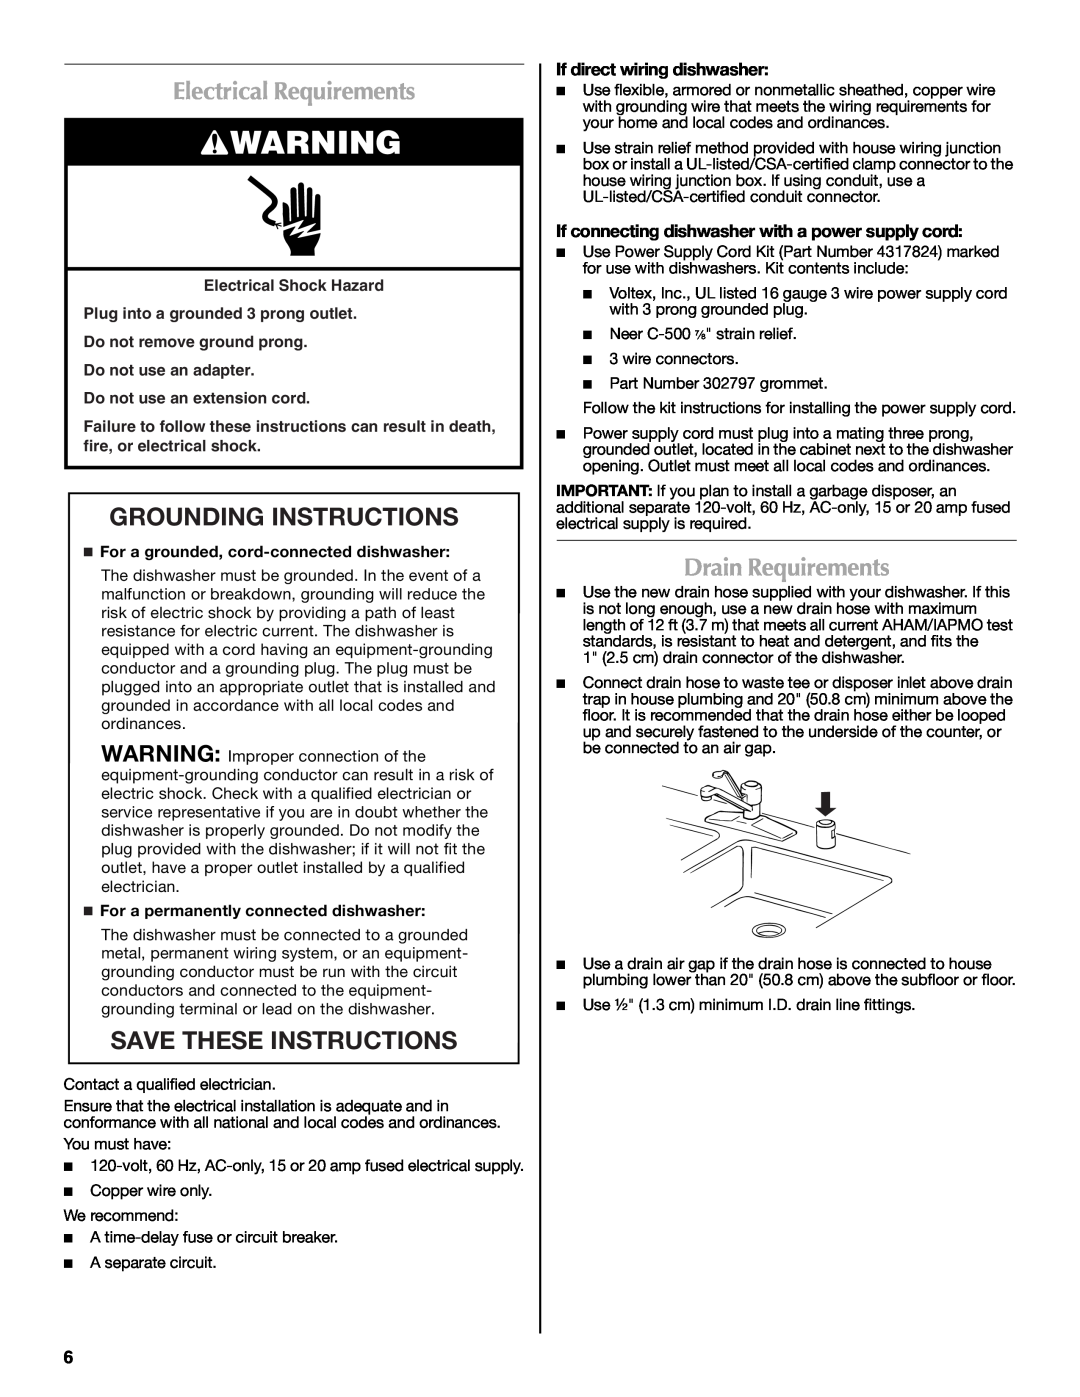 Maytag W10185071B Electrical Requirements, Grounding Instructions, Save These Instructions, Drain Requirements 